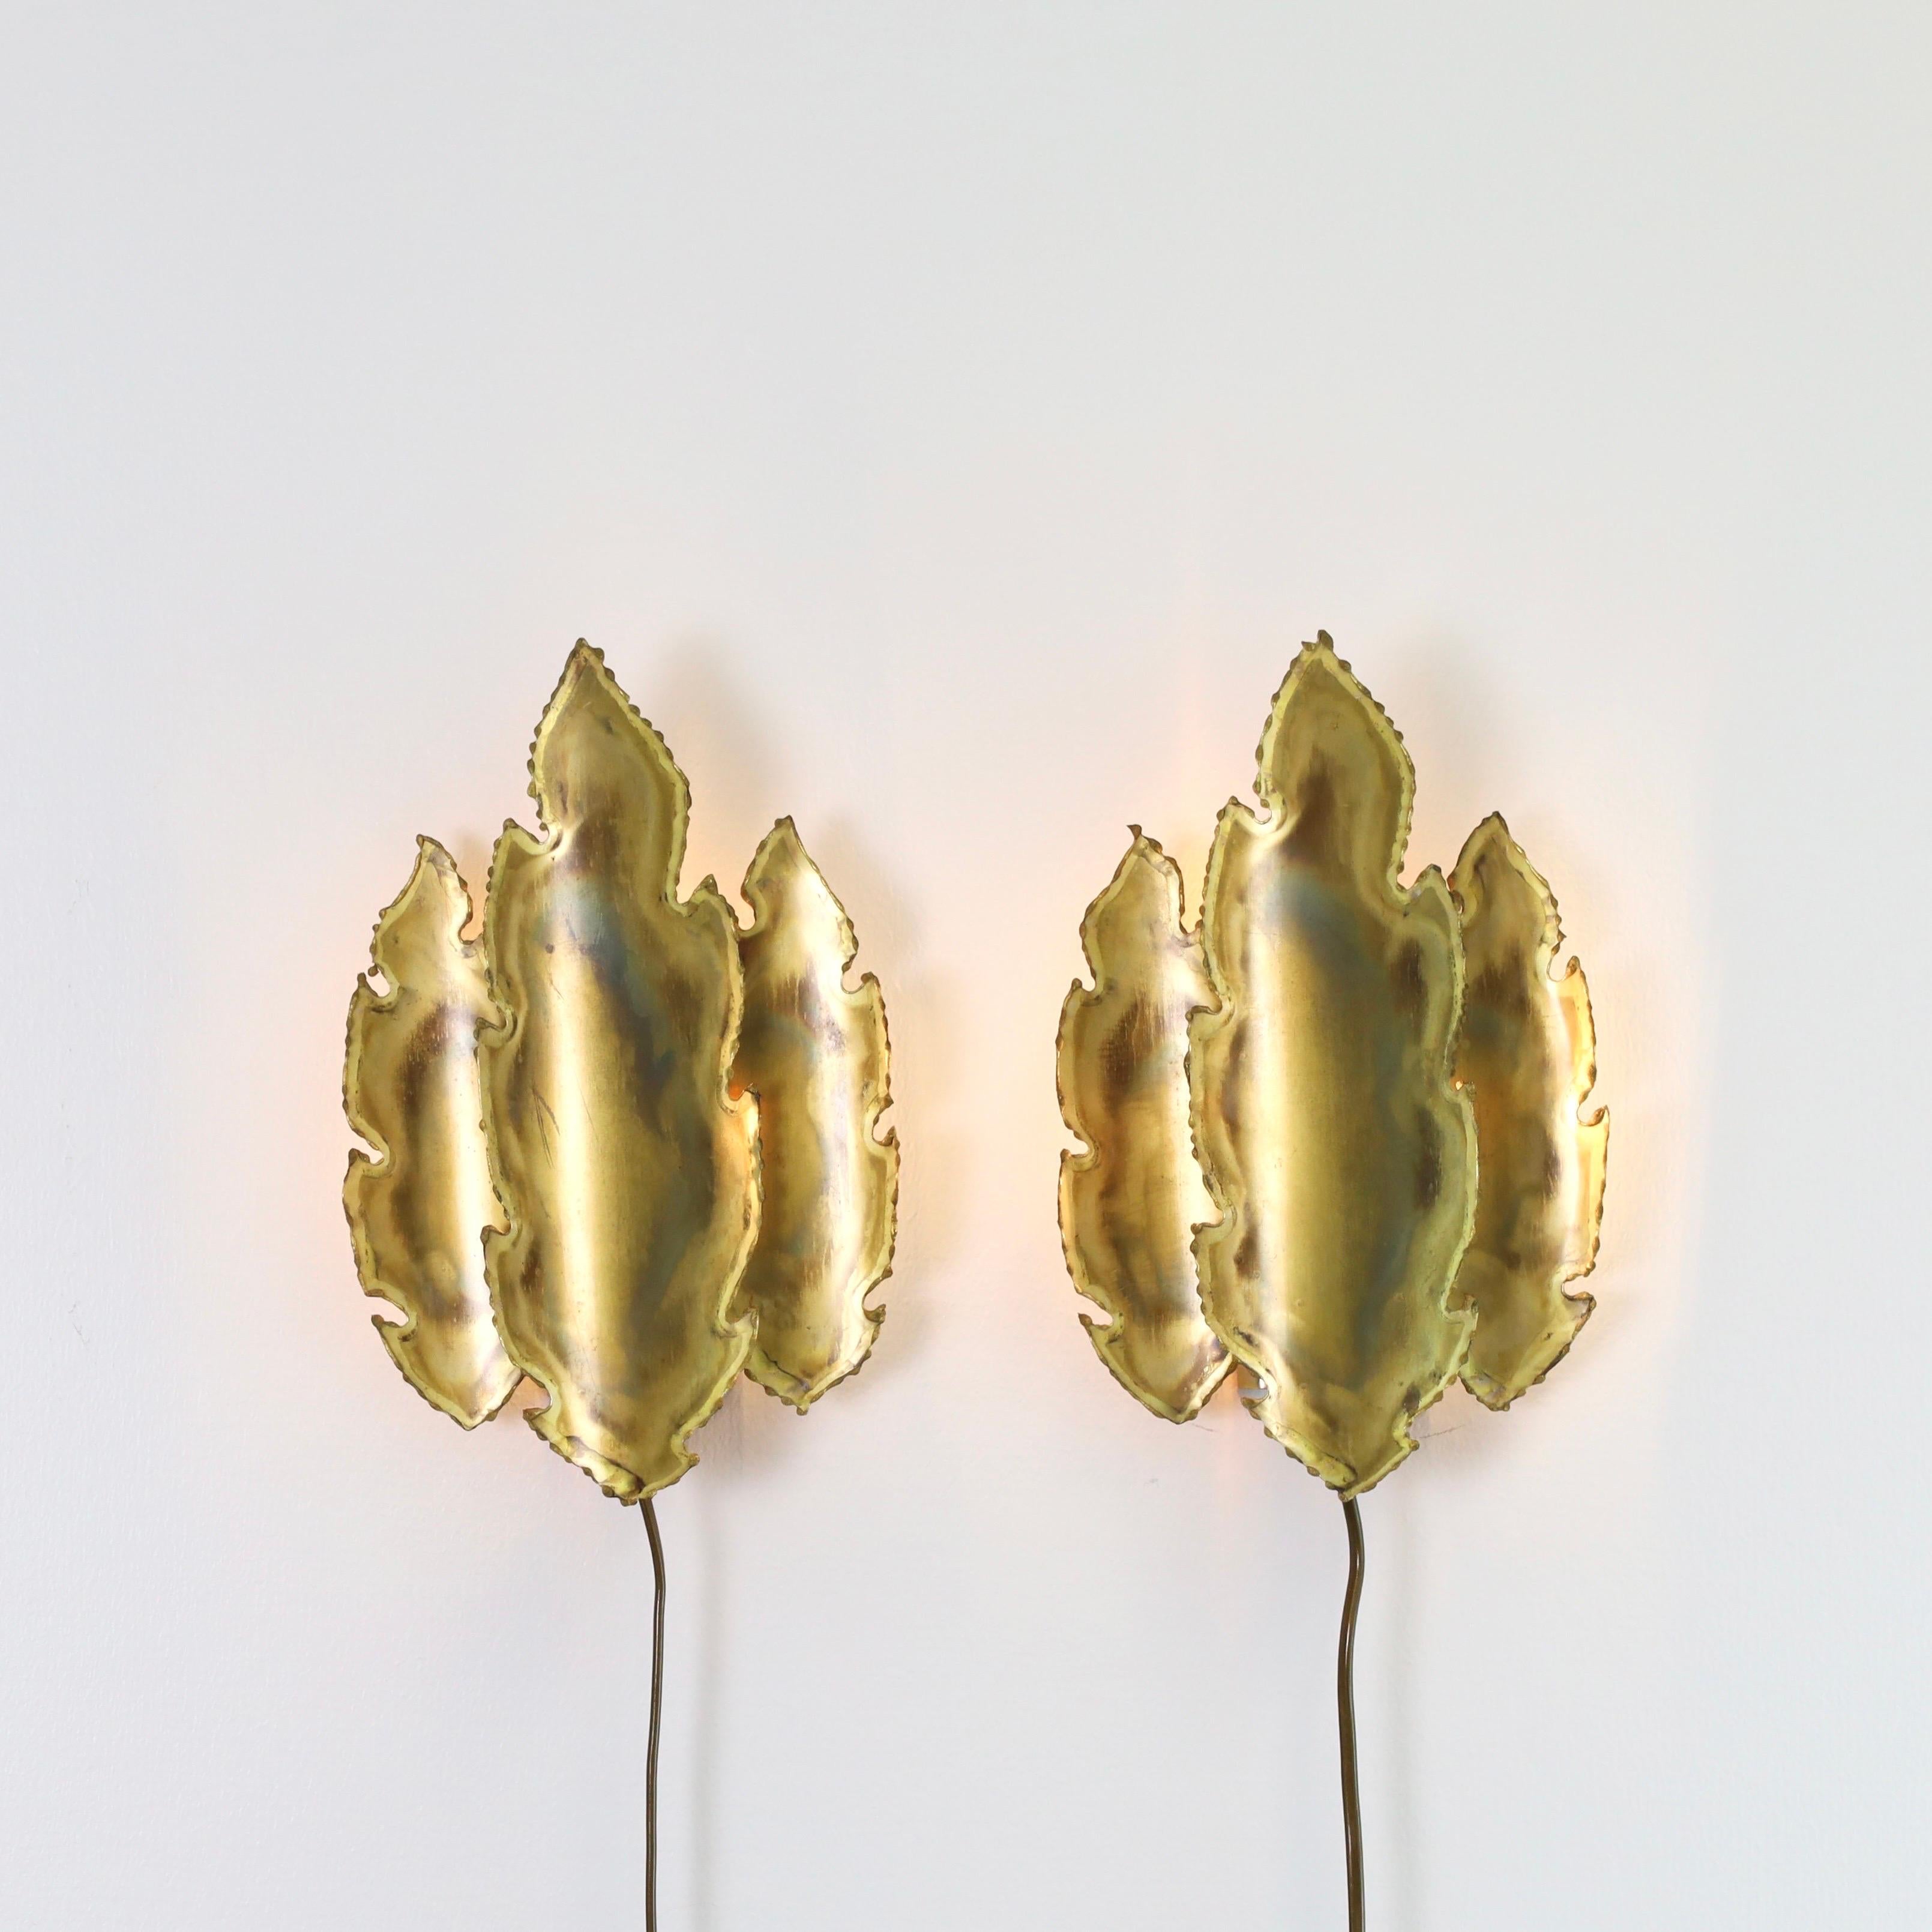 Brutalist Pair of Leaf-Shaped Brass Wall Lamps by Svend Aage Holm Sorensen, 1960s, Denmark For Sale